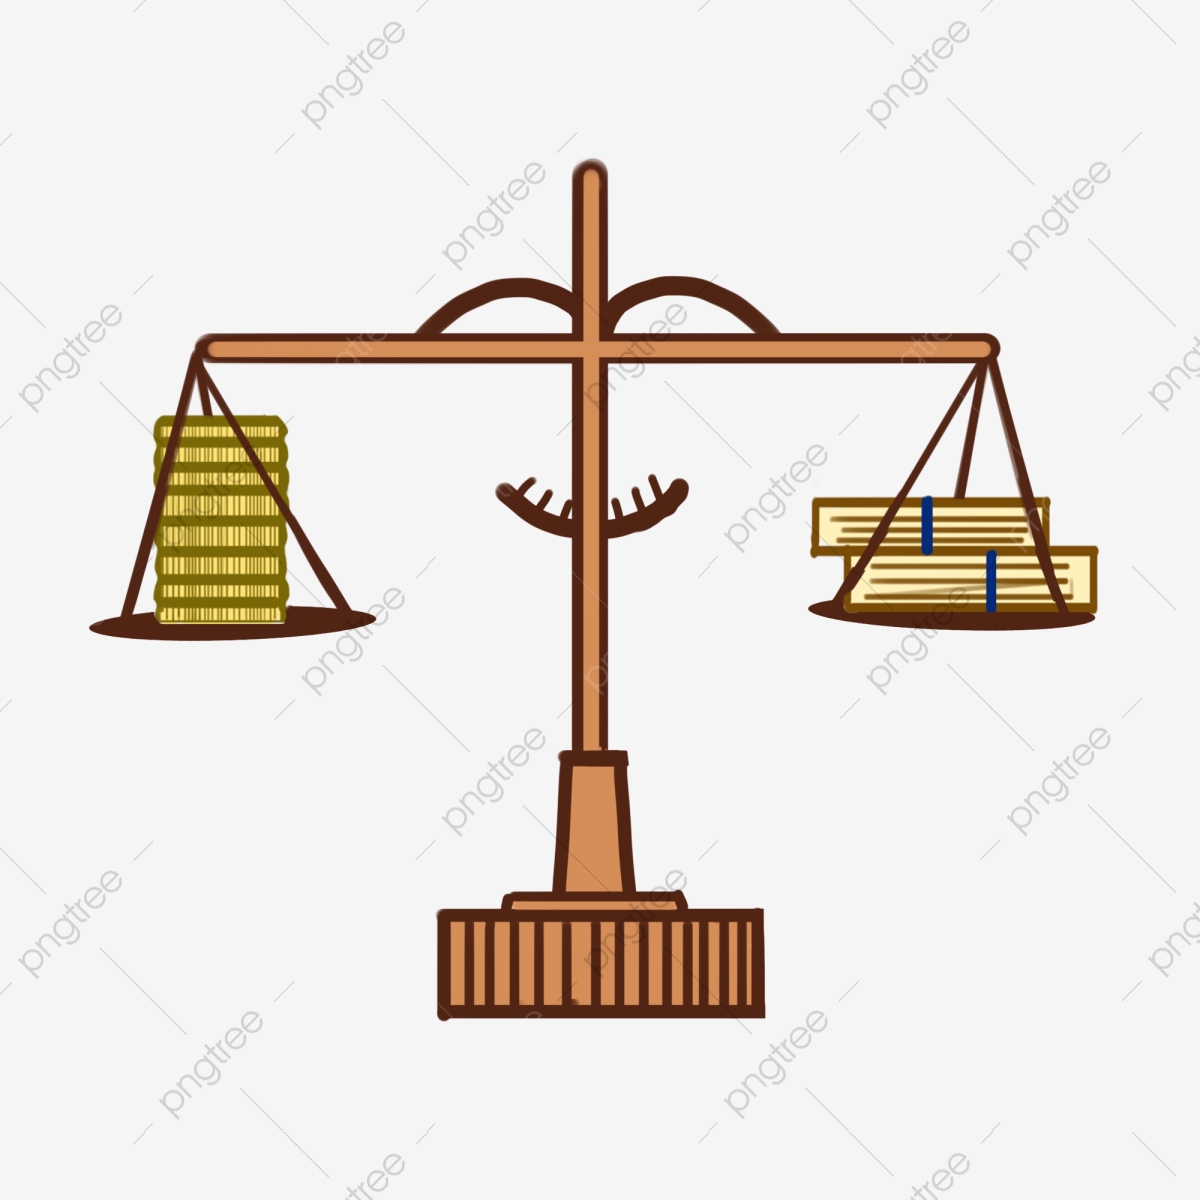 Represents the law of. Legal clipart fairness